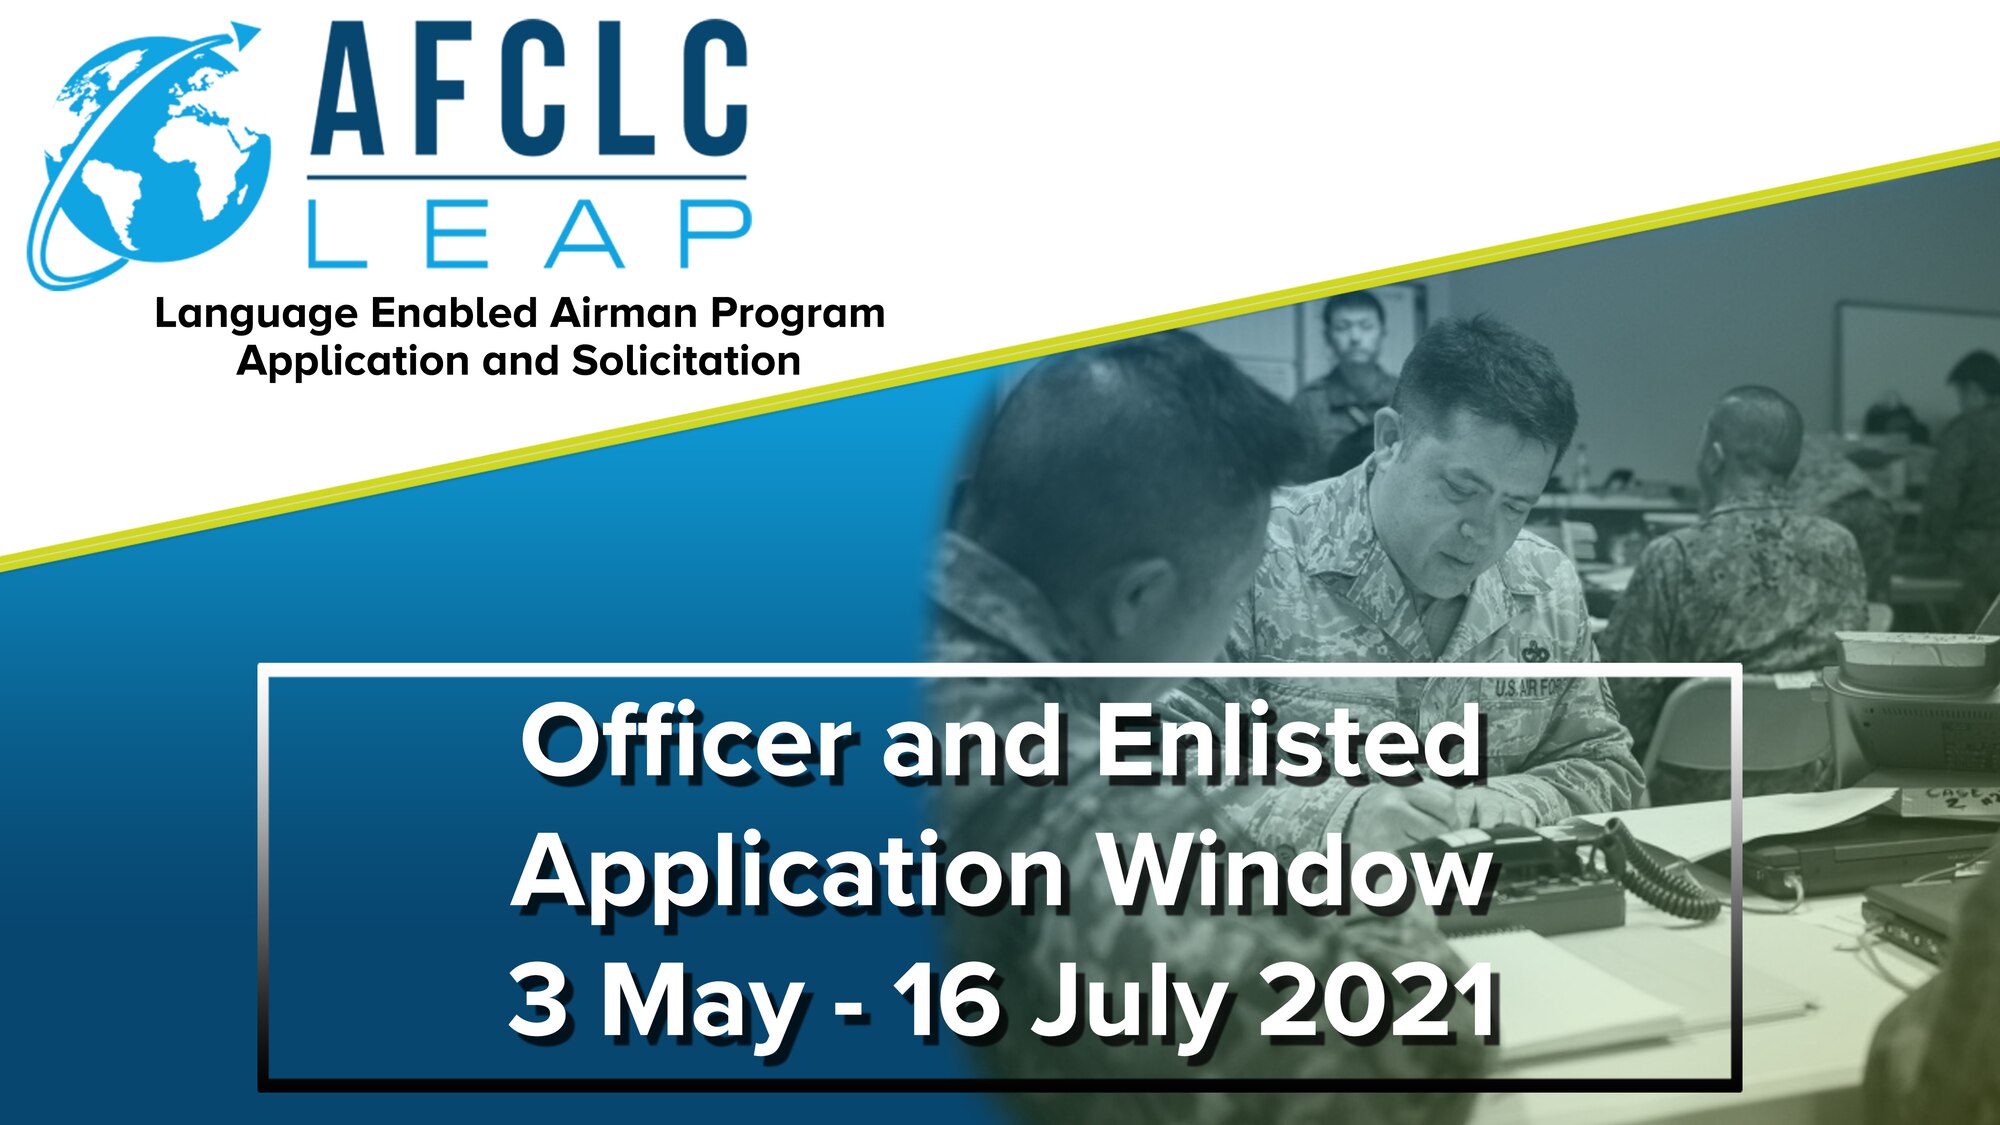 Regular Active Duty Officer and Enlisted members from the U.S. Air Force and U.S. Space Force may apply online for the Language Enabled Airman Program 3 May through 16 July 2021.